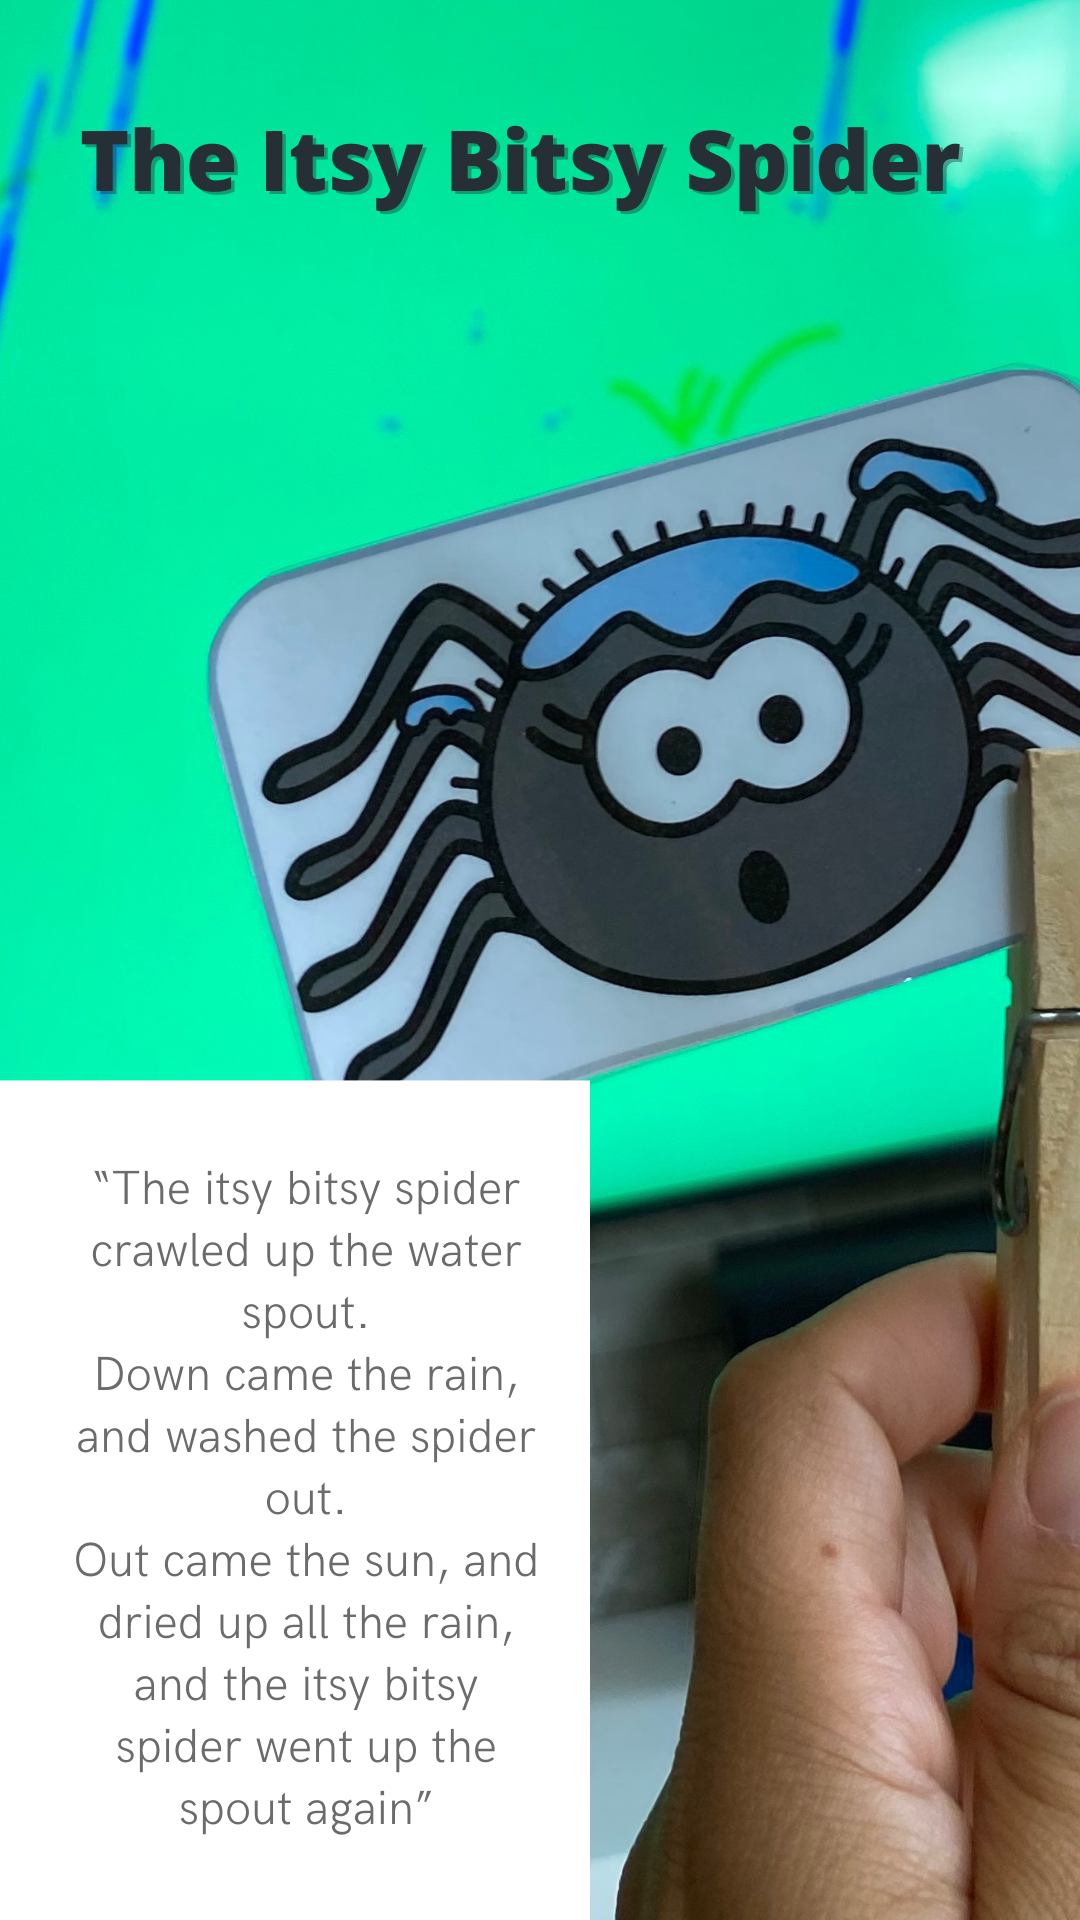 Incy Wincy Spider Lyrics and Actions + FREE Activities - Learning